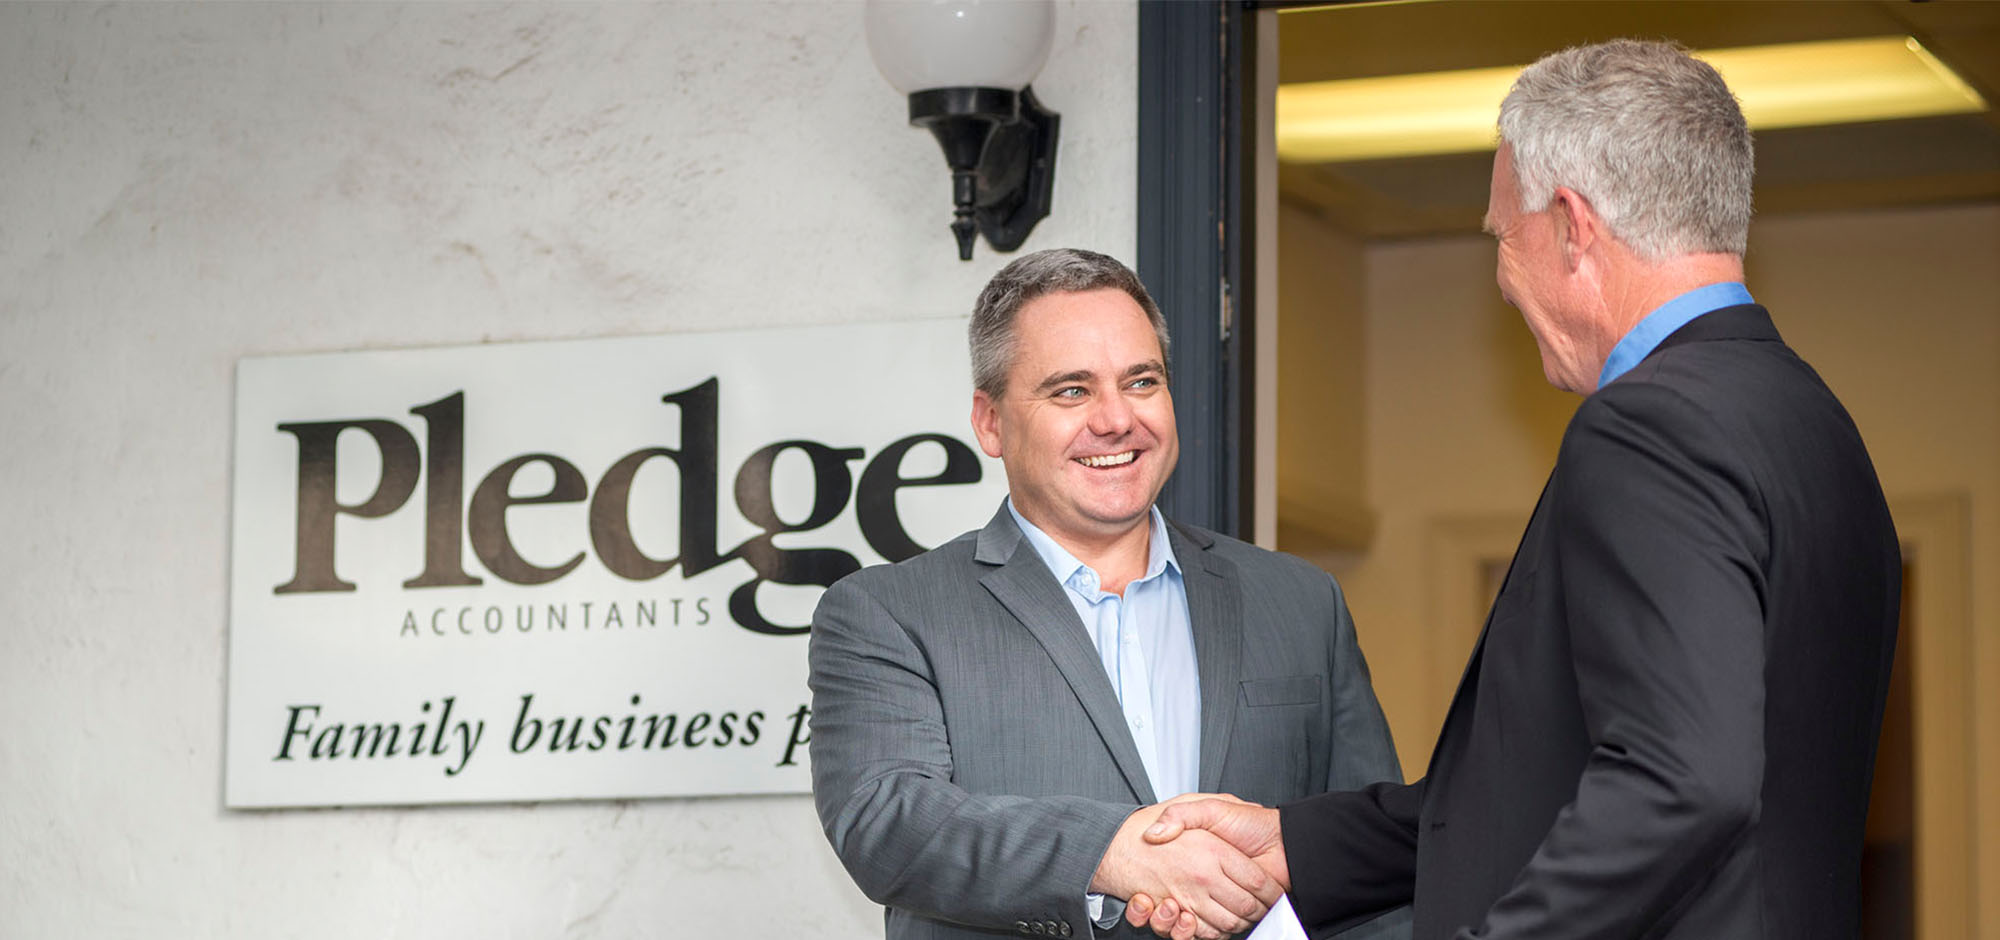 Ben from Pledge Accounting with a happy client